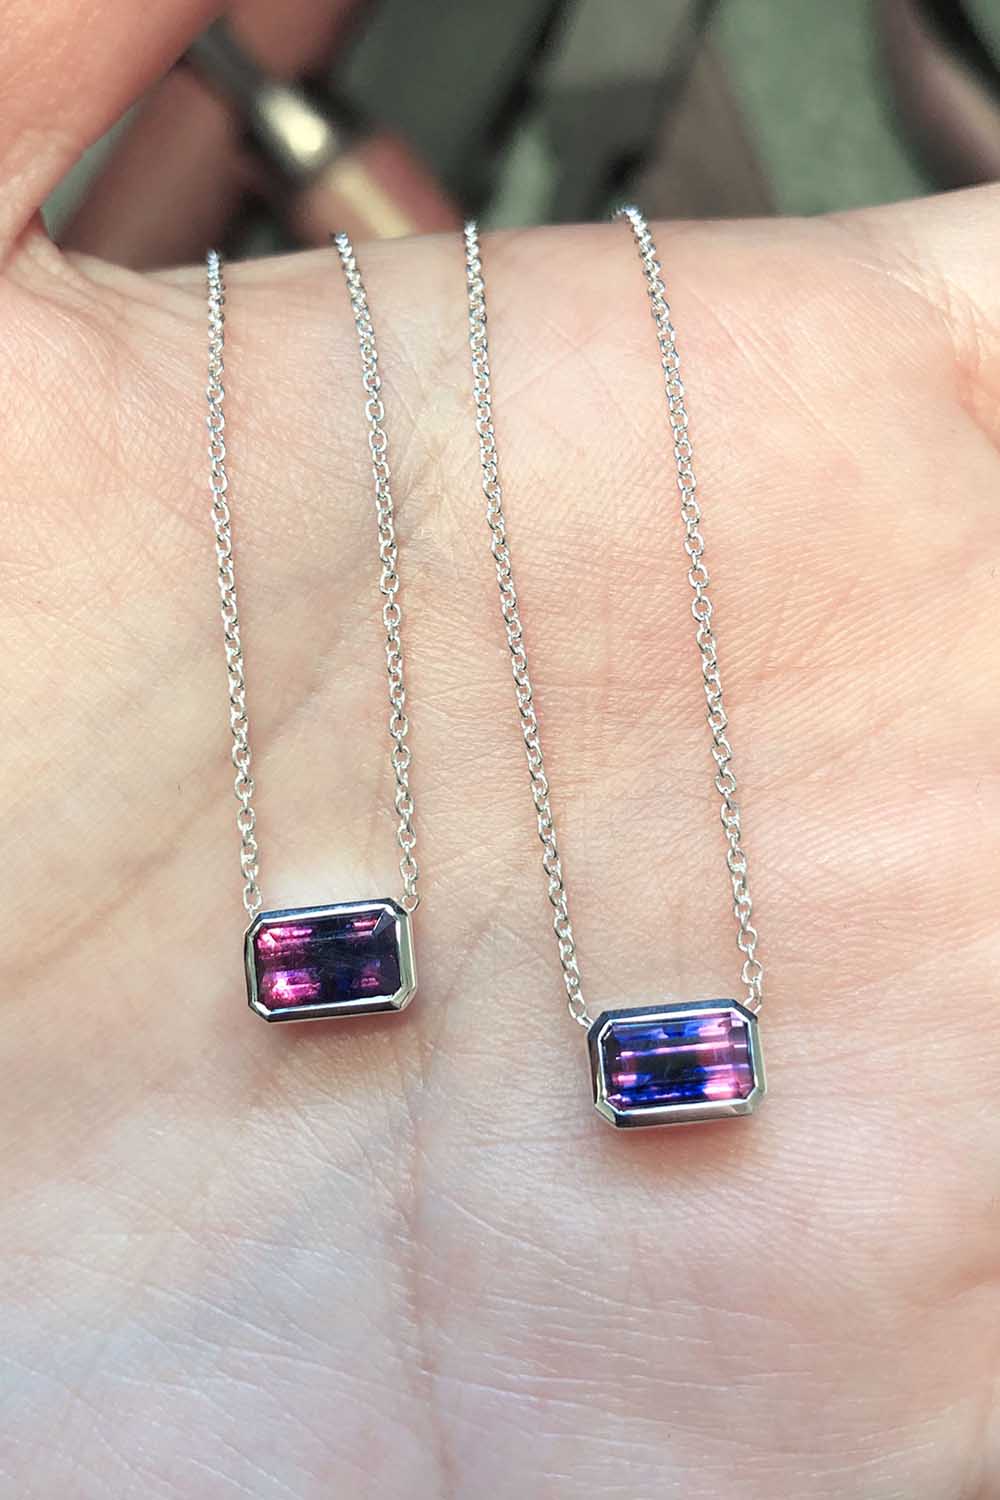 Matching sterling silver Tanzanian sapphire necklaces